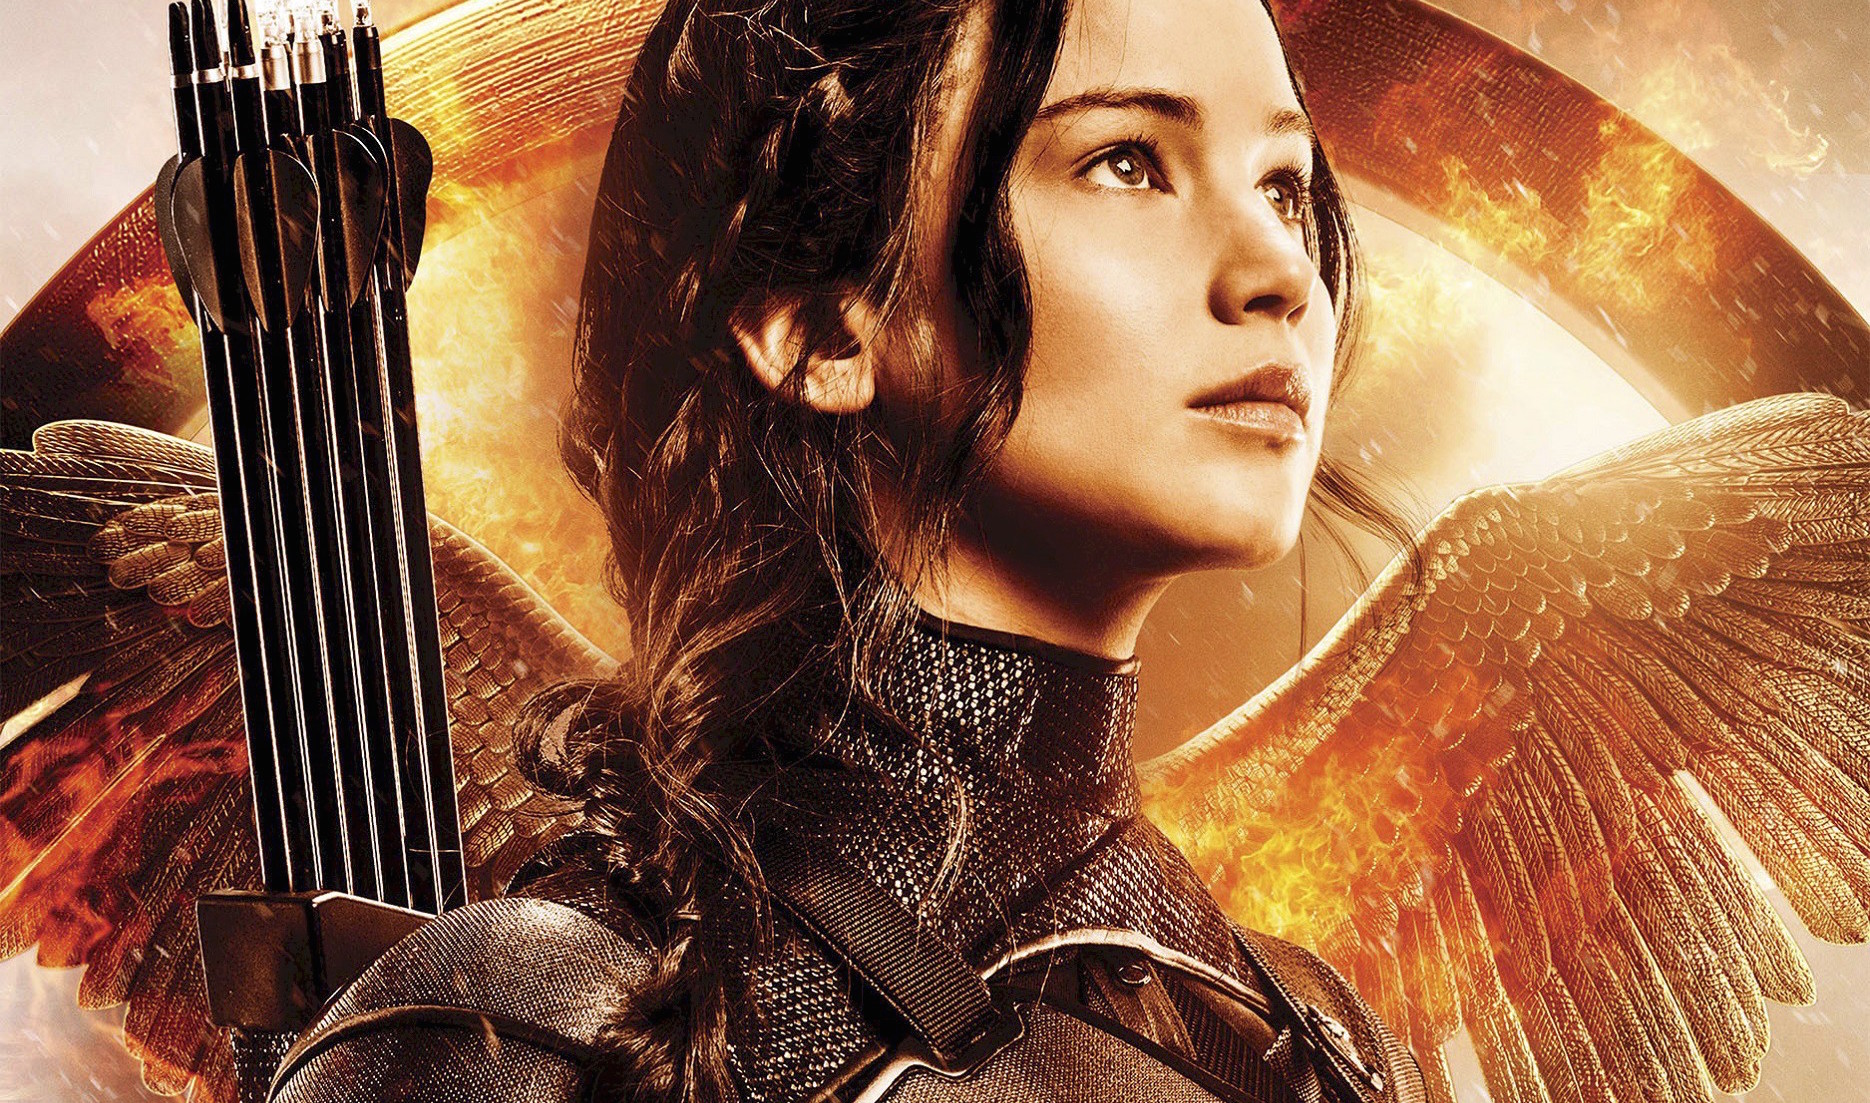 The Hunger Games Mockingjay Part 2 HD Wallpapers download free